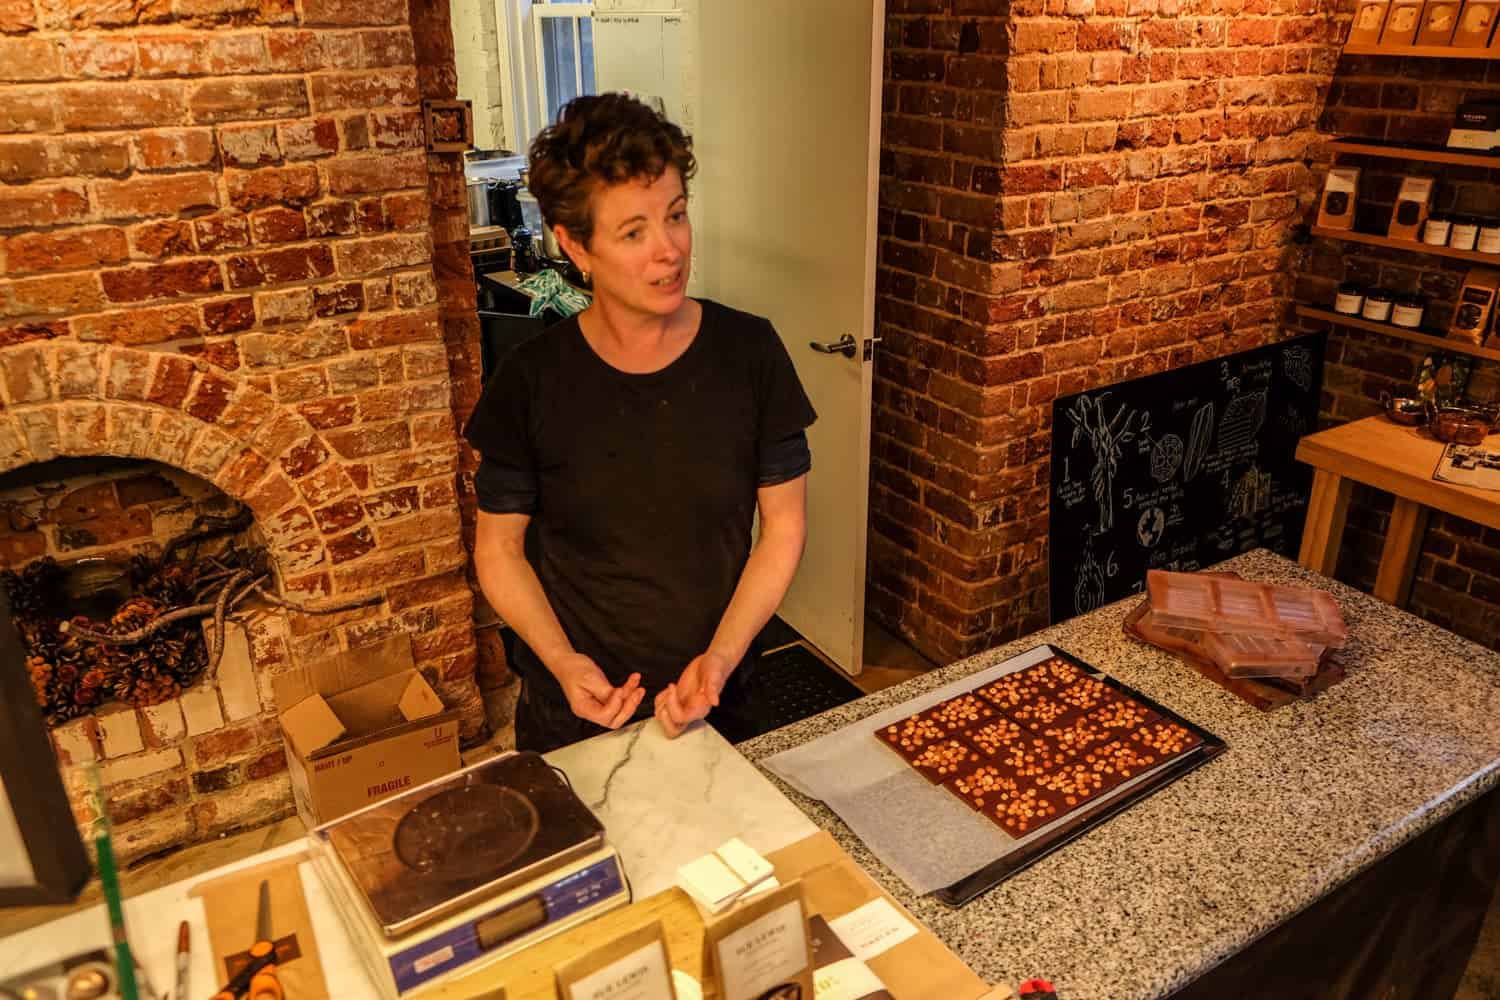 A honey expert demonstrates the making of chocolate at the boutique honey store inside Perth's State Buildings